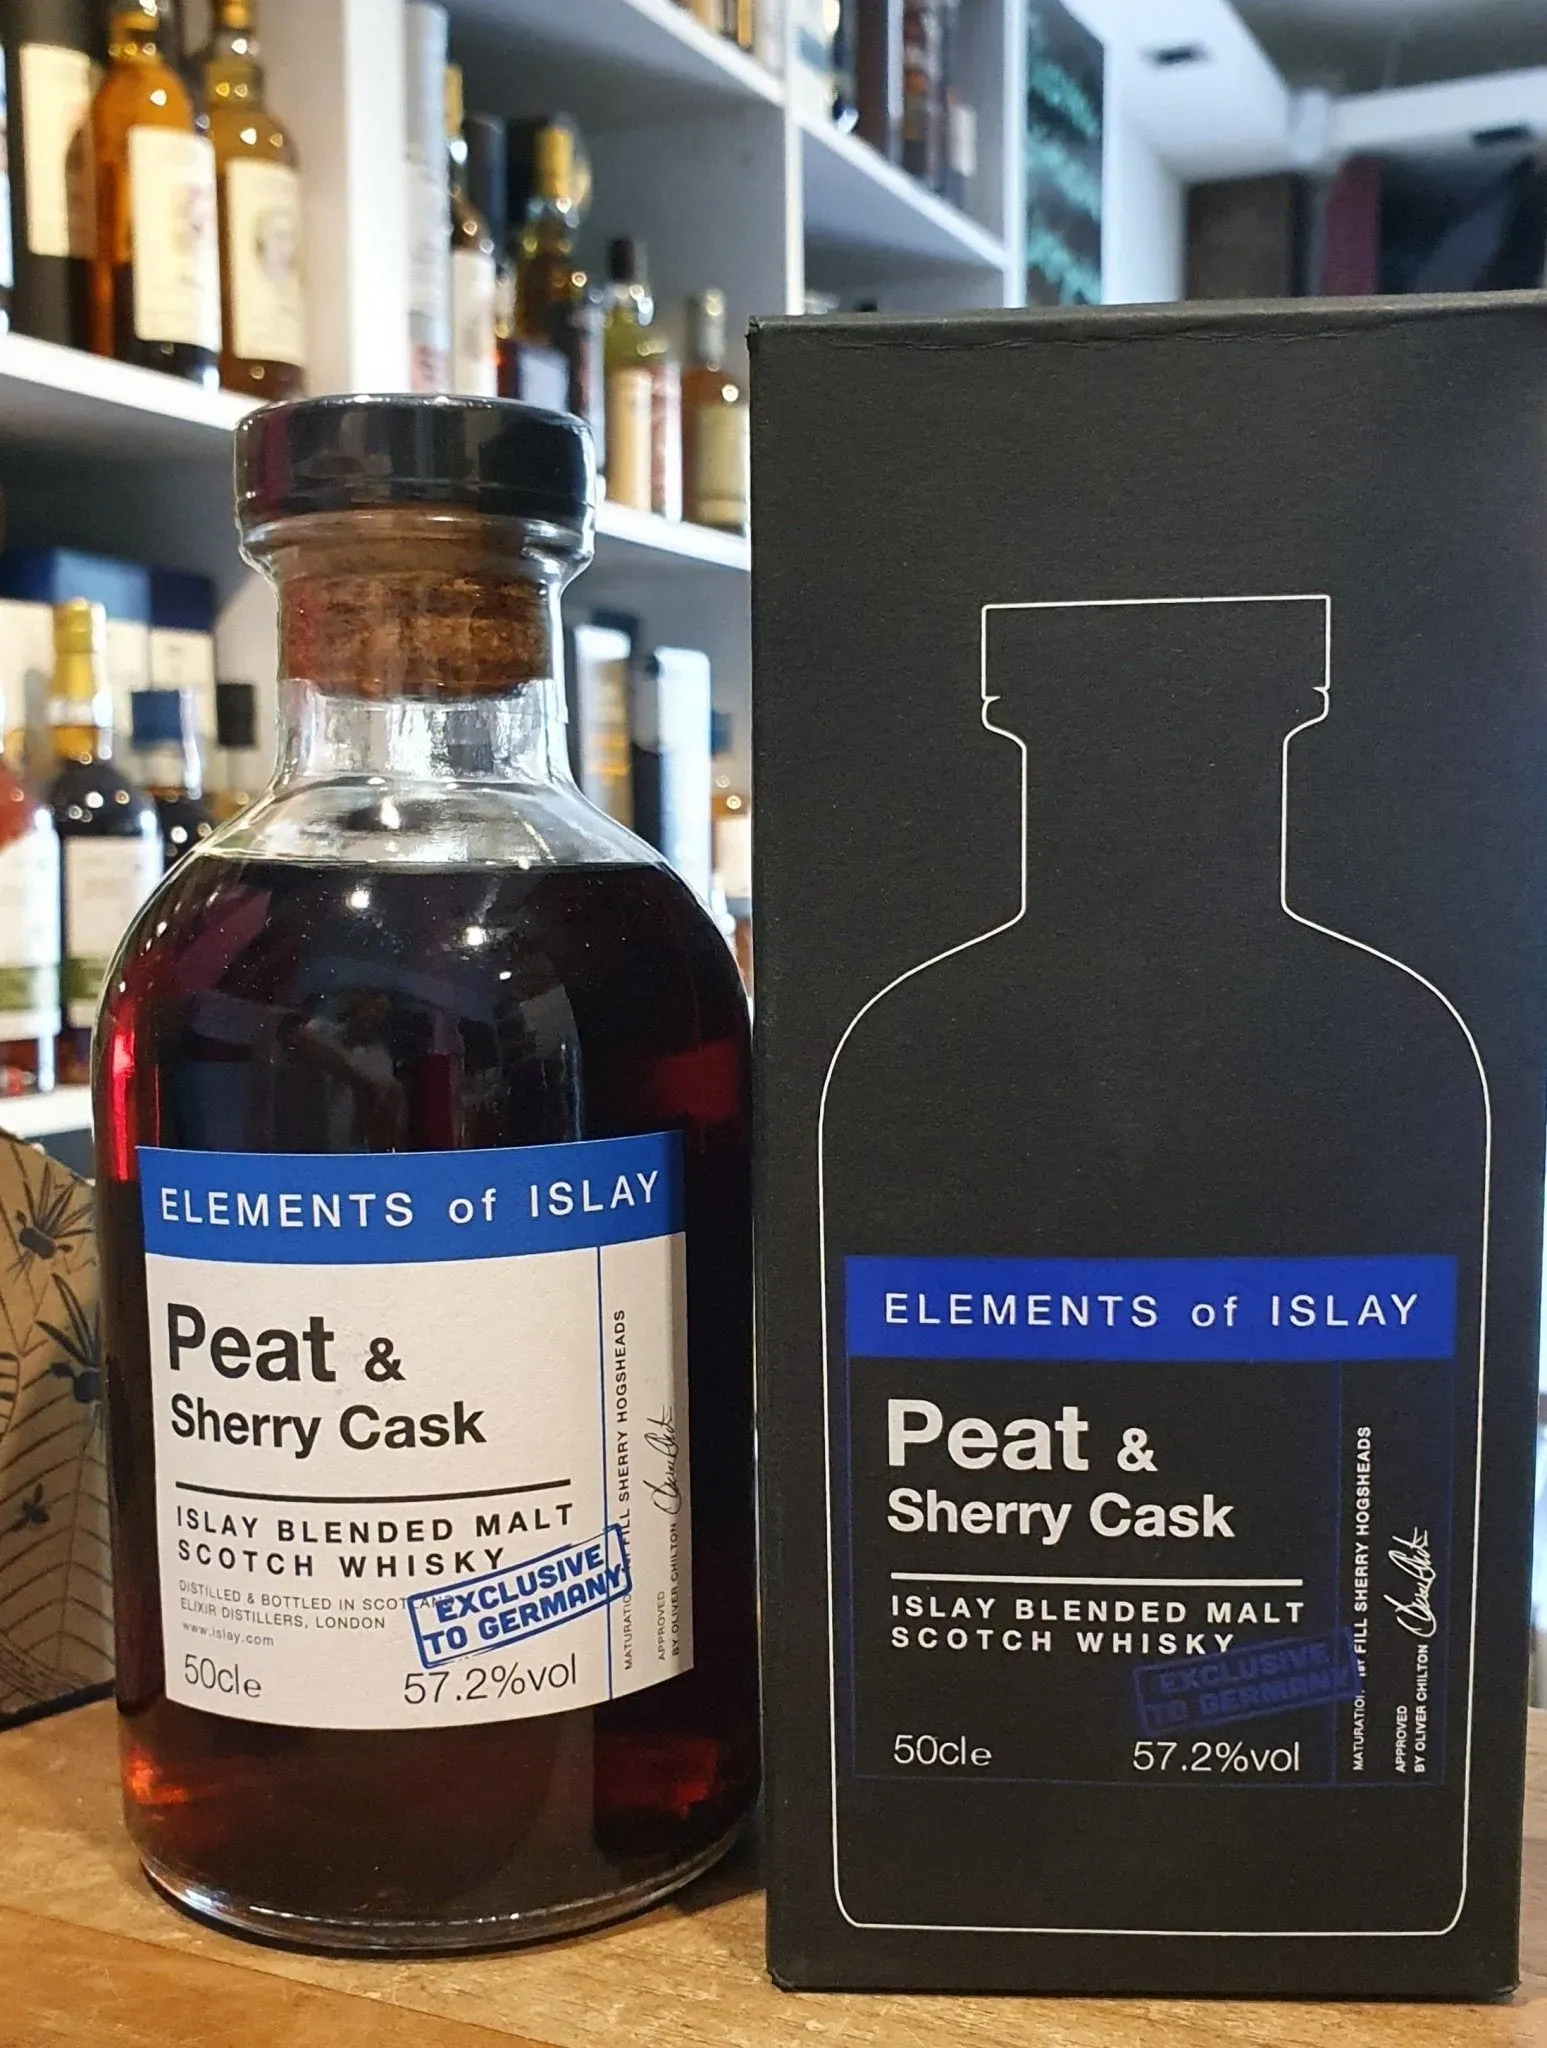 Elements of islay Peat & sherry 2 Islay blend scotch whisky 0,5l 57,2 % vol.